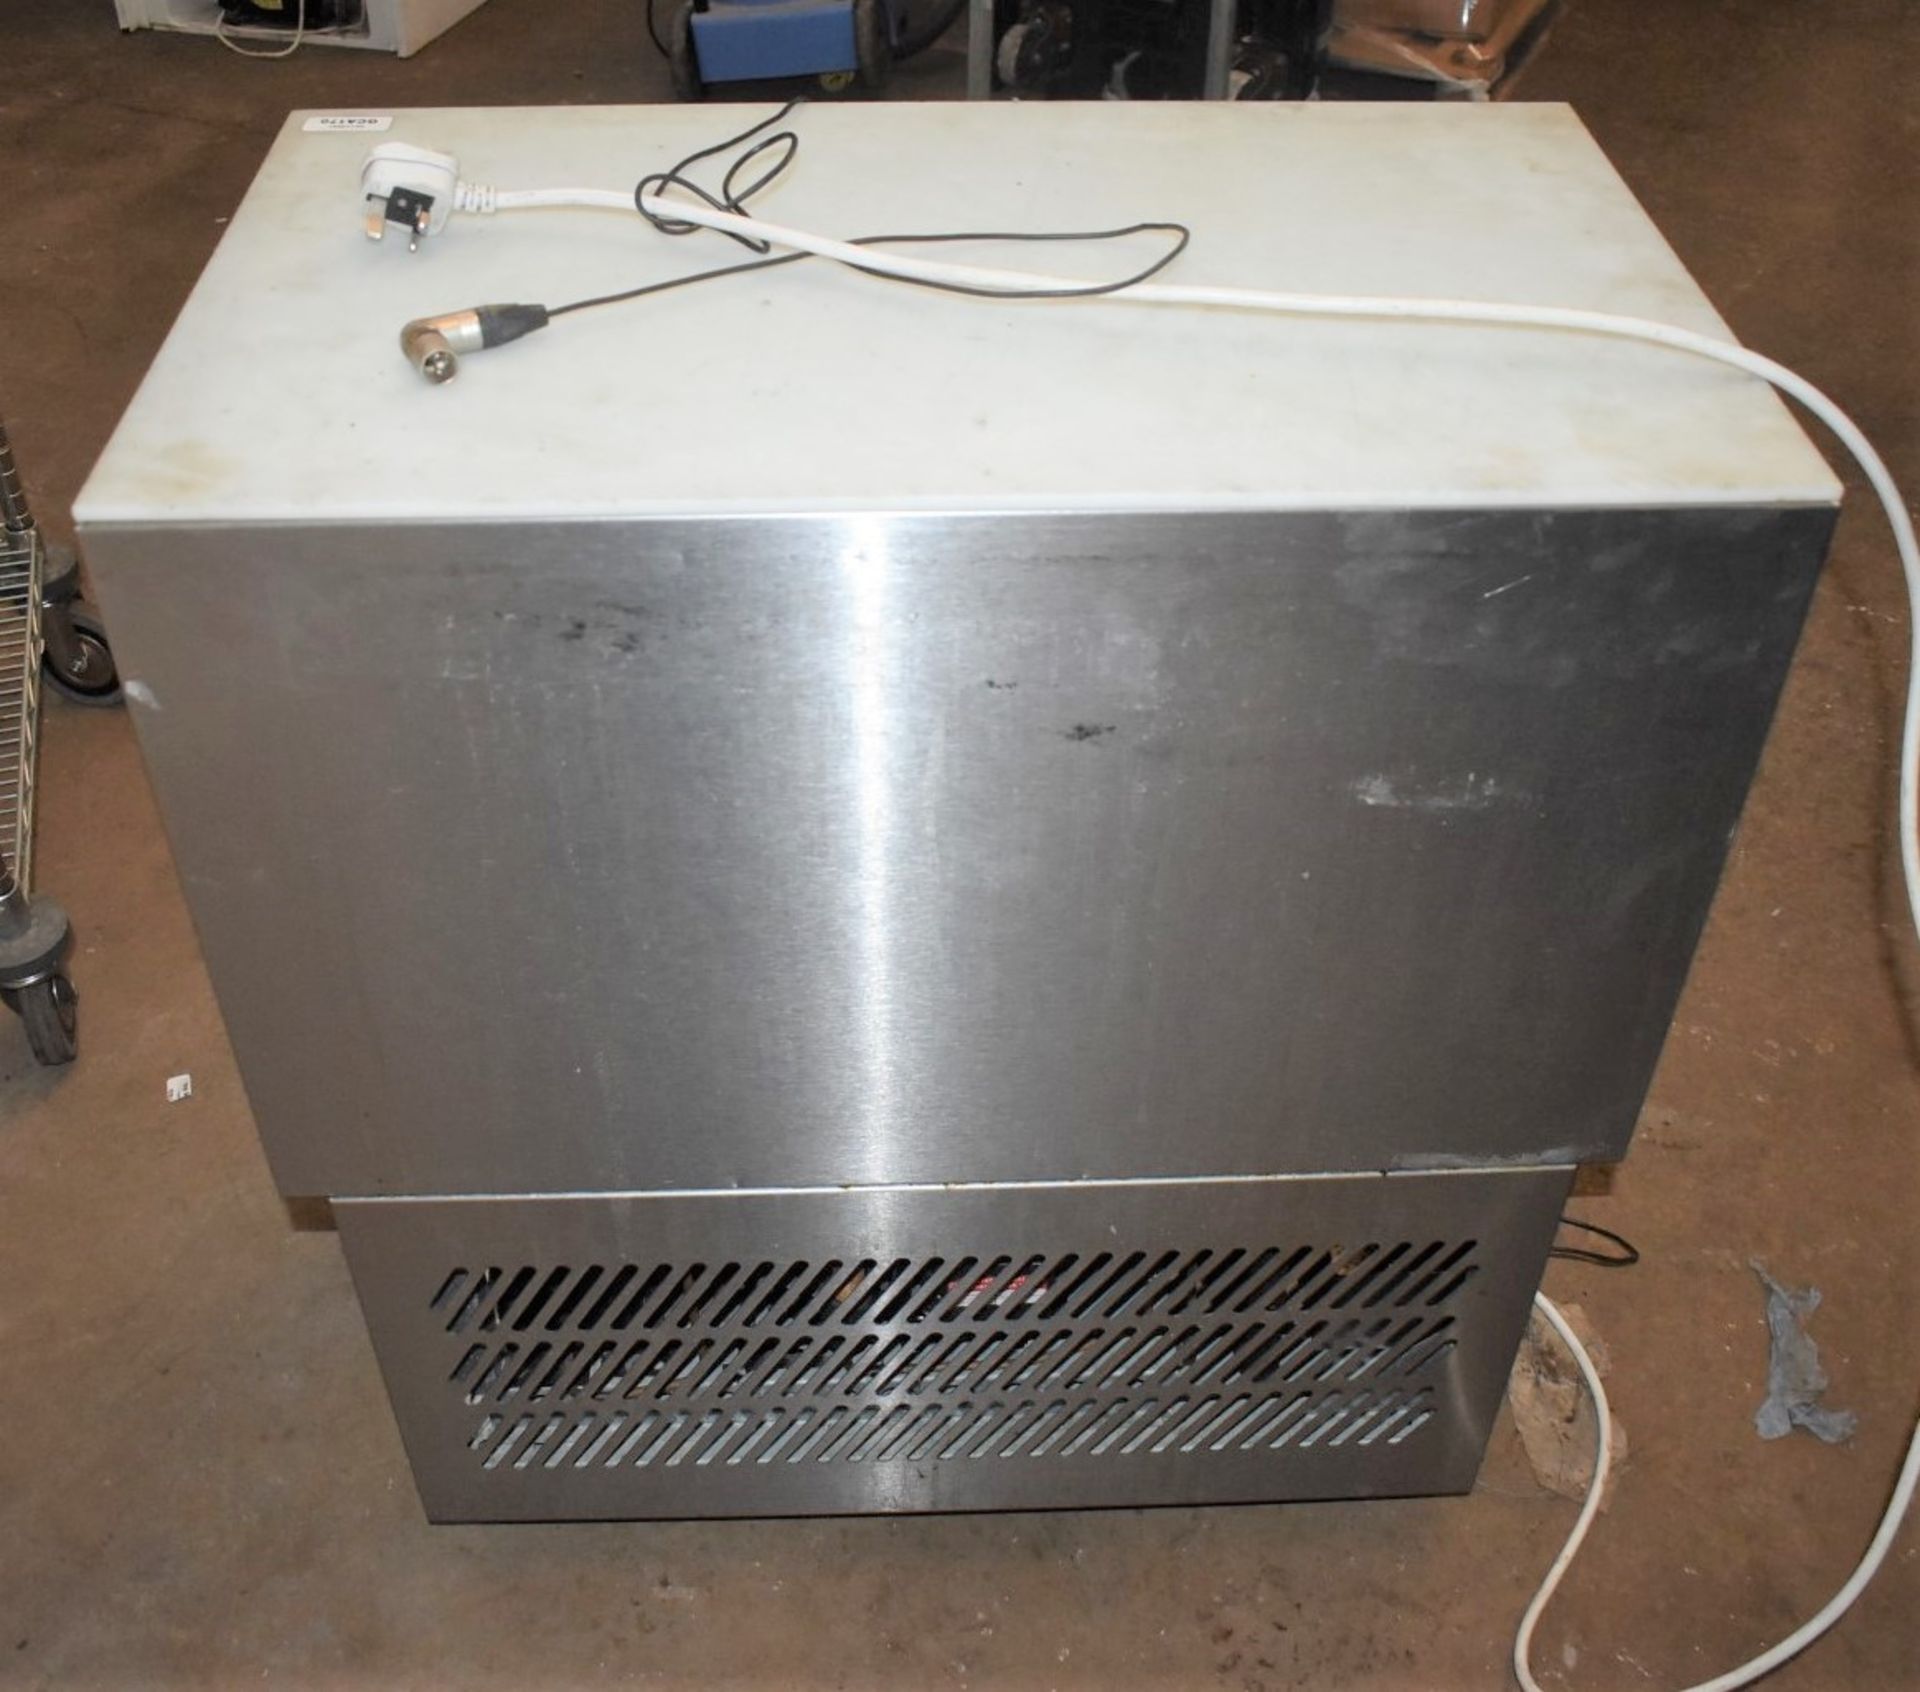 1 x Williams PW4 Refrigerated Prep Well With Prop Top Lid - CL011 - Ref CGA170 WH5 - 240v - - Image 6 of 9